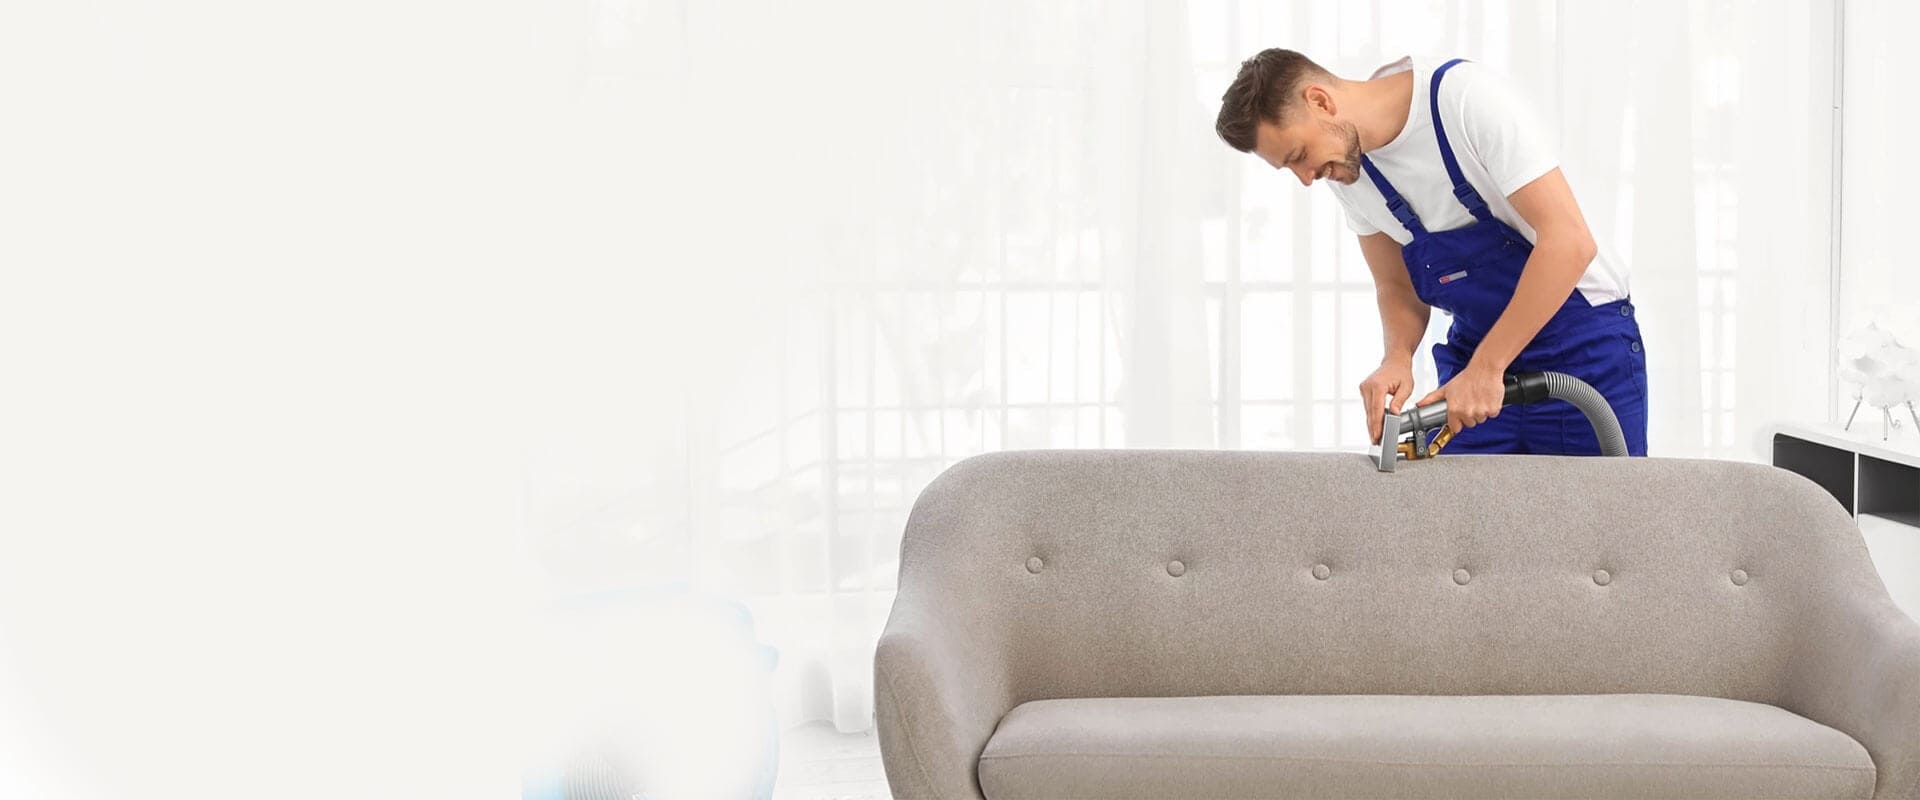 How To Clean A Couch: A Guide For Fabrics, Stains & Smells